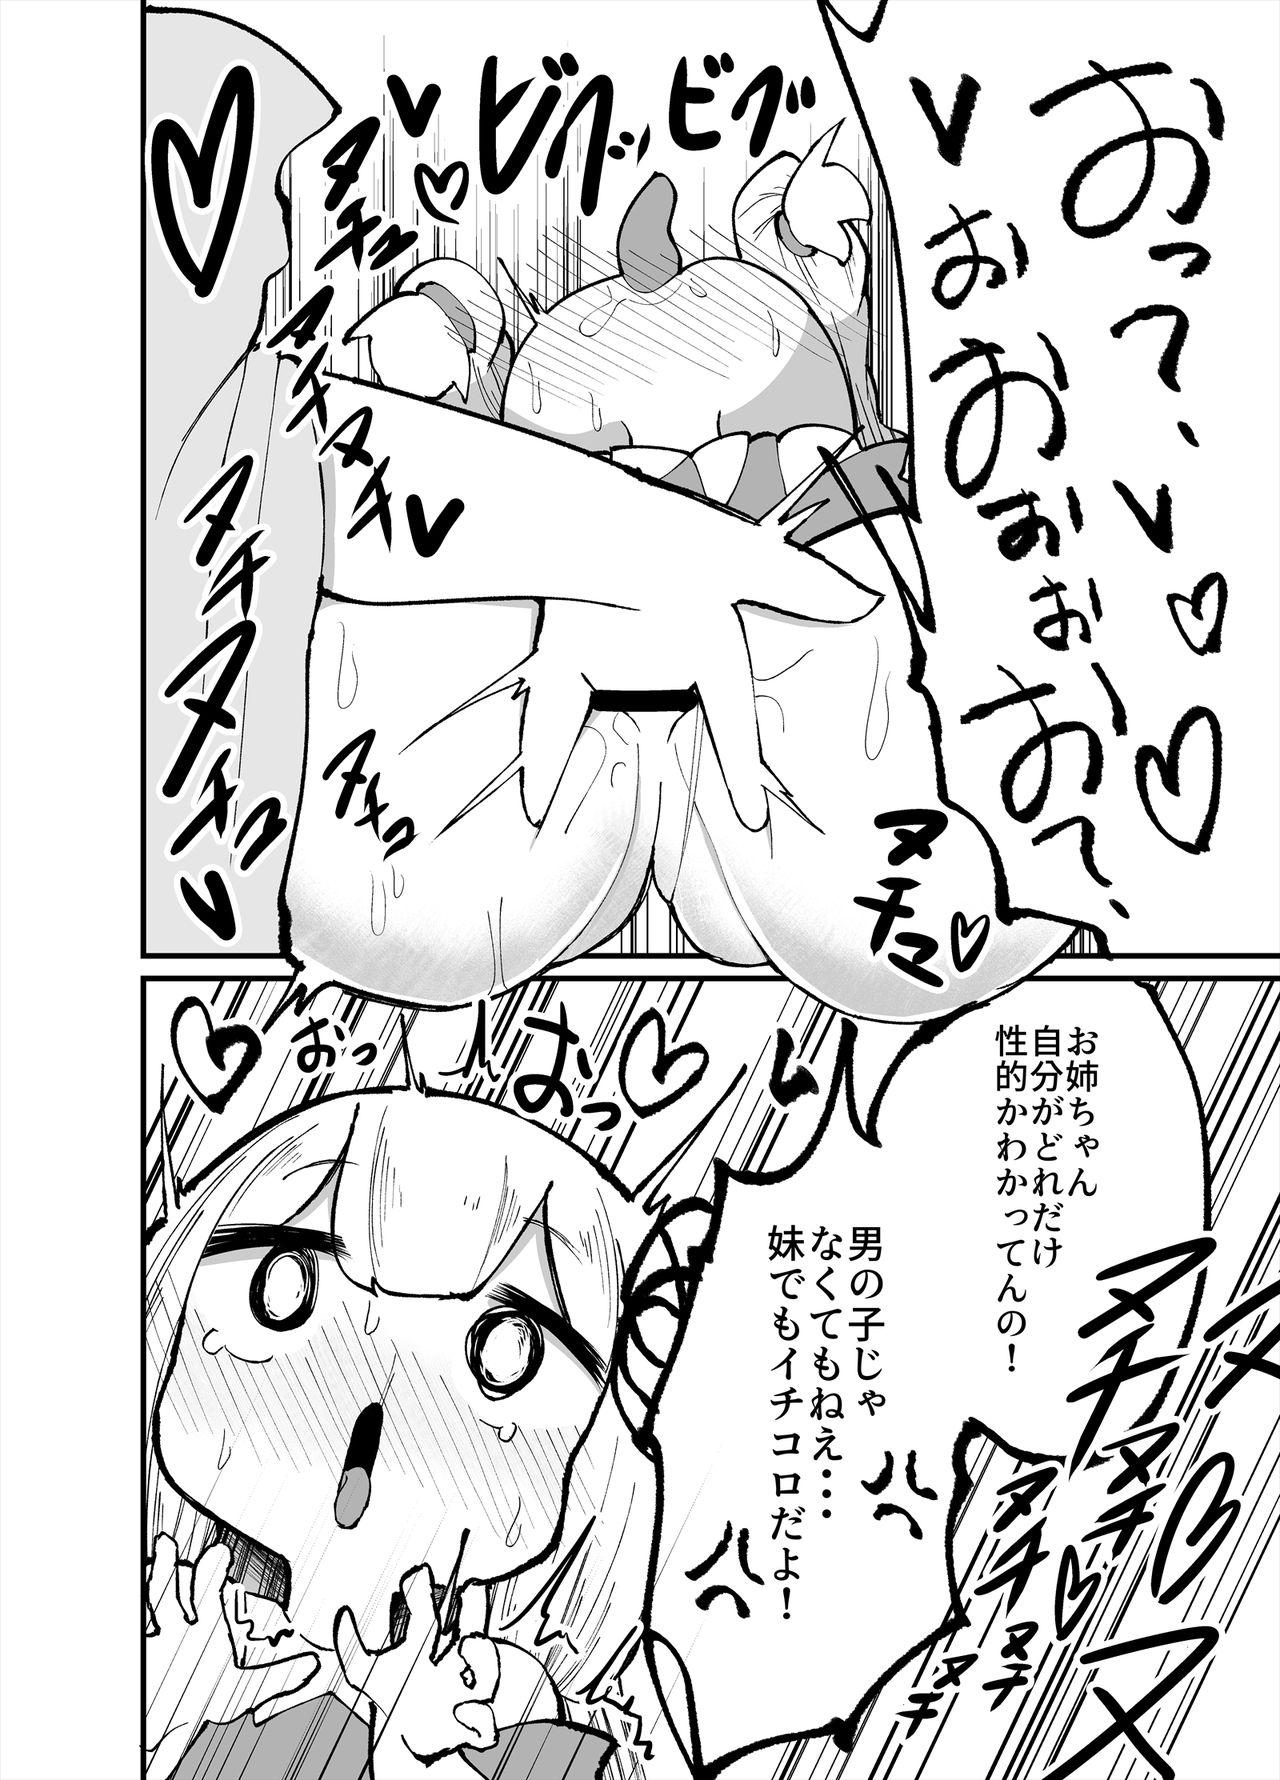 Mediumtits Chicchai! Onee-chan to Imouto no Ura - Voiceroid Letsdoeit - Page 4